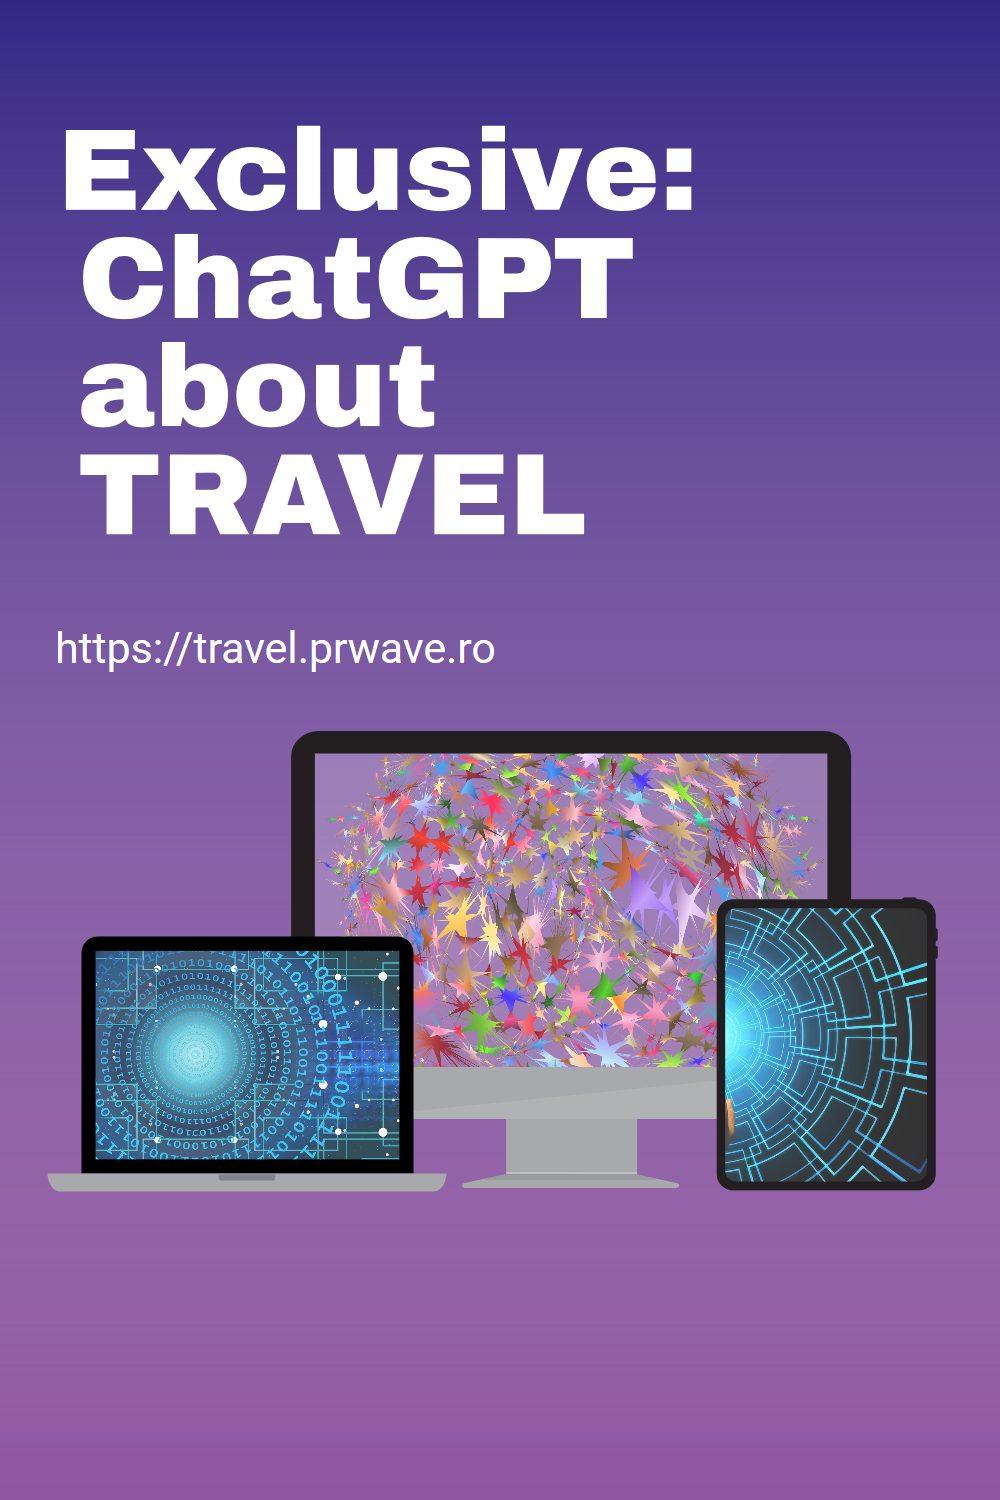 Exclusive ChatGPT about travel - travel trends, travel jokes, travel quotes, is ChatGPT useful, and more #chatgpt #chatgptravel #ai #aitravel #chatgptinterview #chatgptdiscussion 